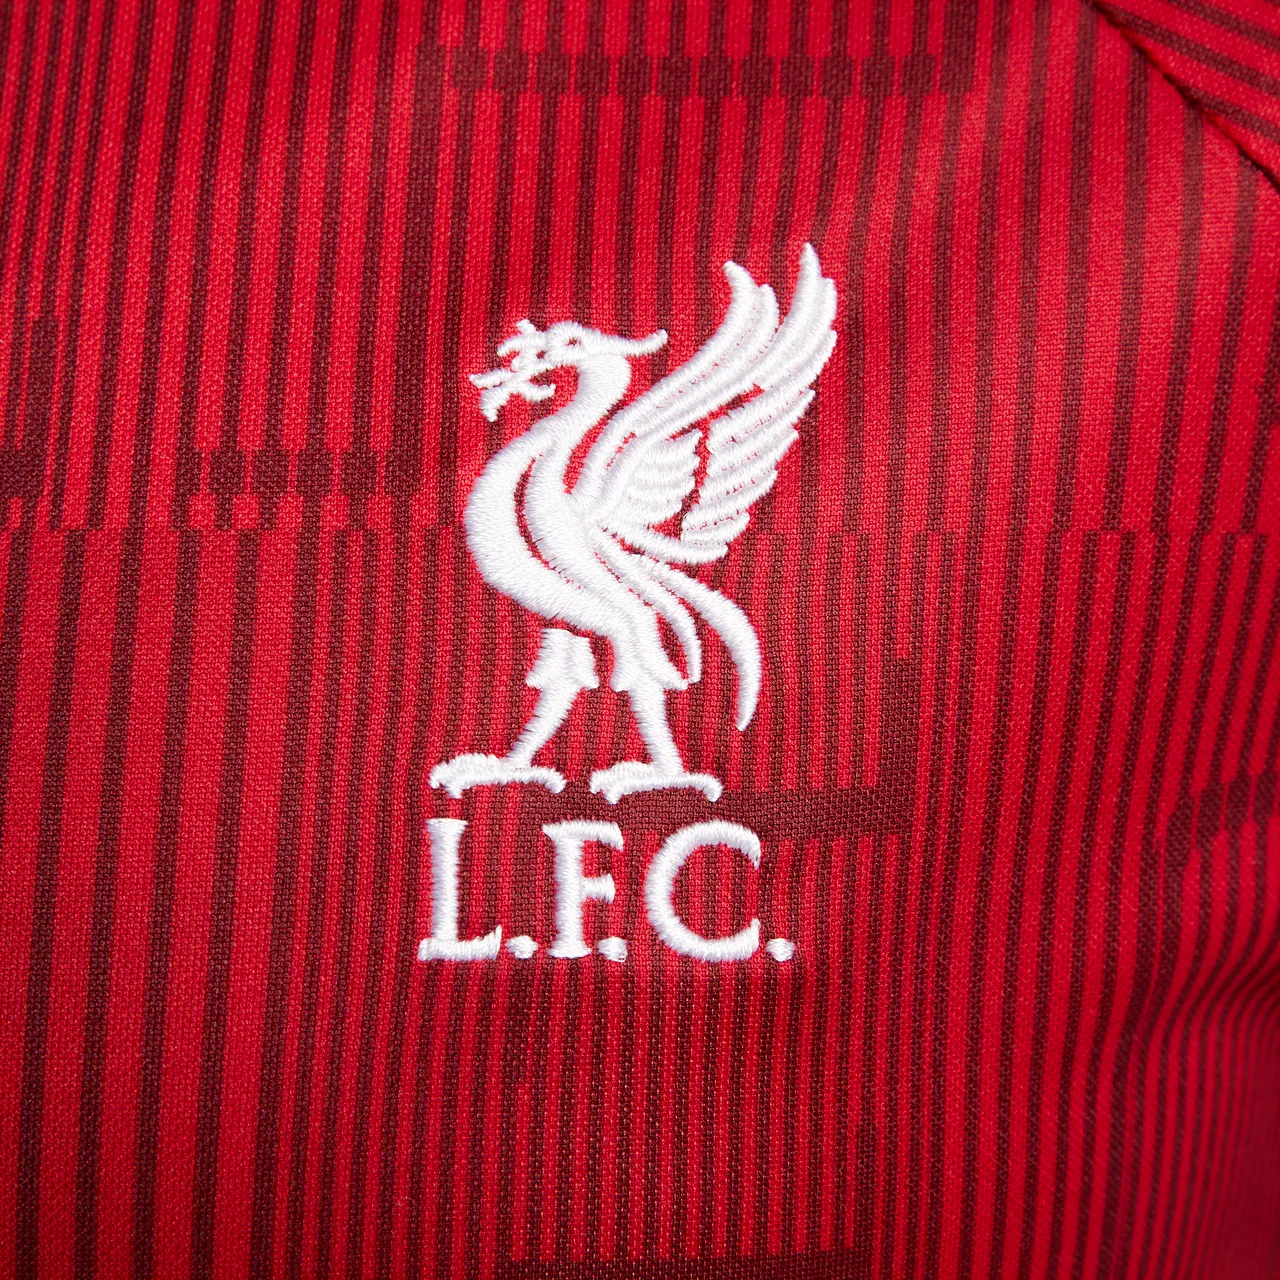 Liverpool F.C. Academy Pro Women's Nike Dri-FIT Pre-Match Football Top - Red - Polyester